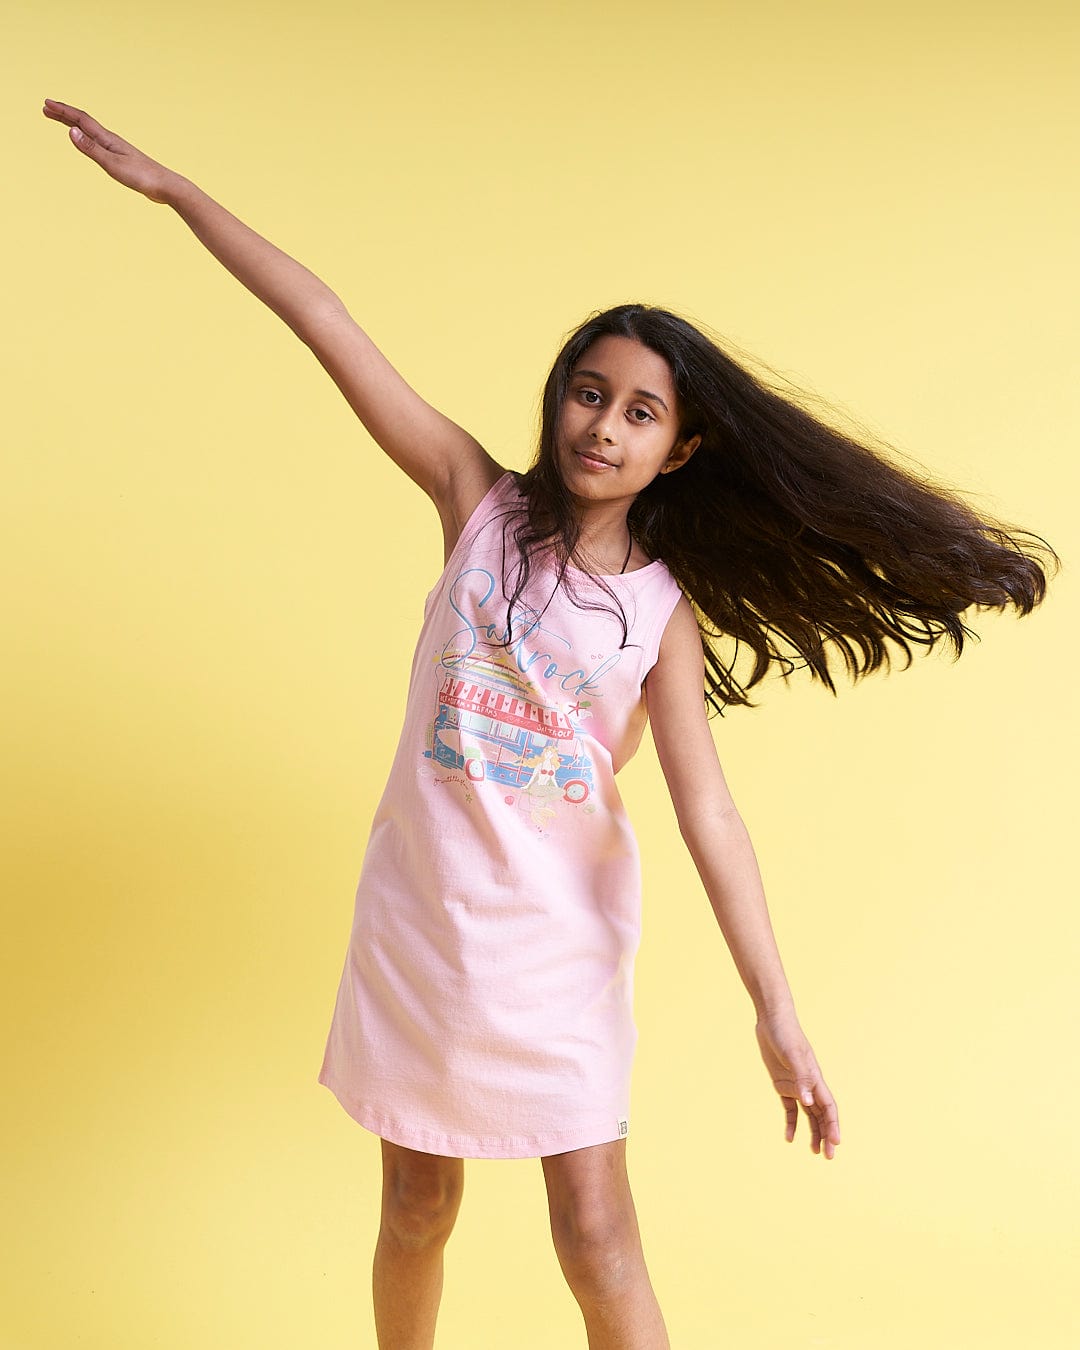 A girl in a Saltrock Ice Cream Dreams - Kids Dress - Light Pink posing on a yellow background.